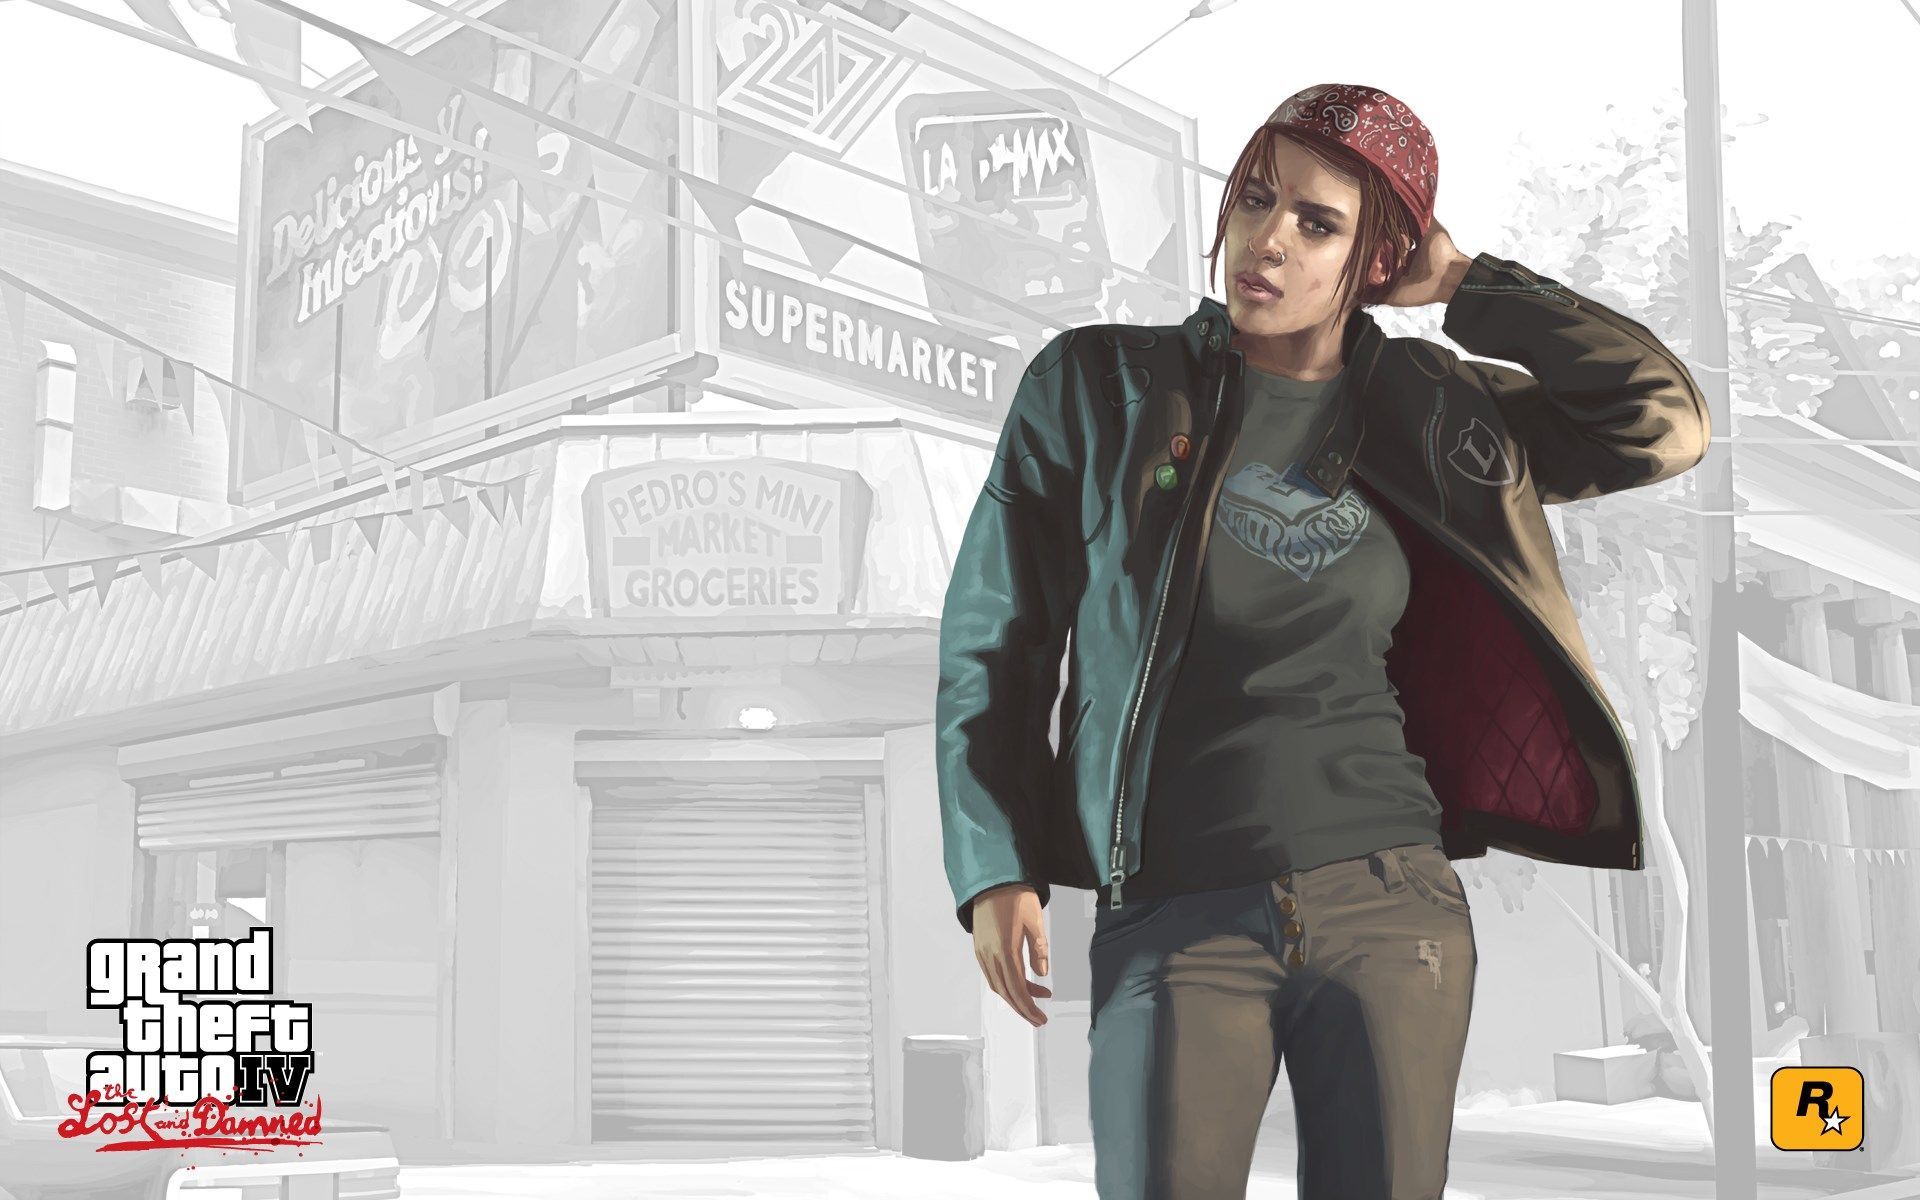 Grand Theft Auto IV: The Lost and Damned game wallpaper